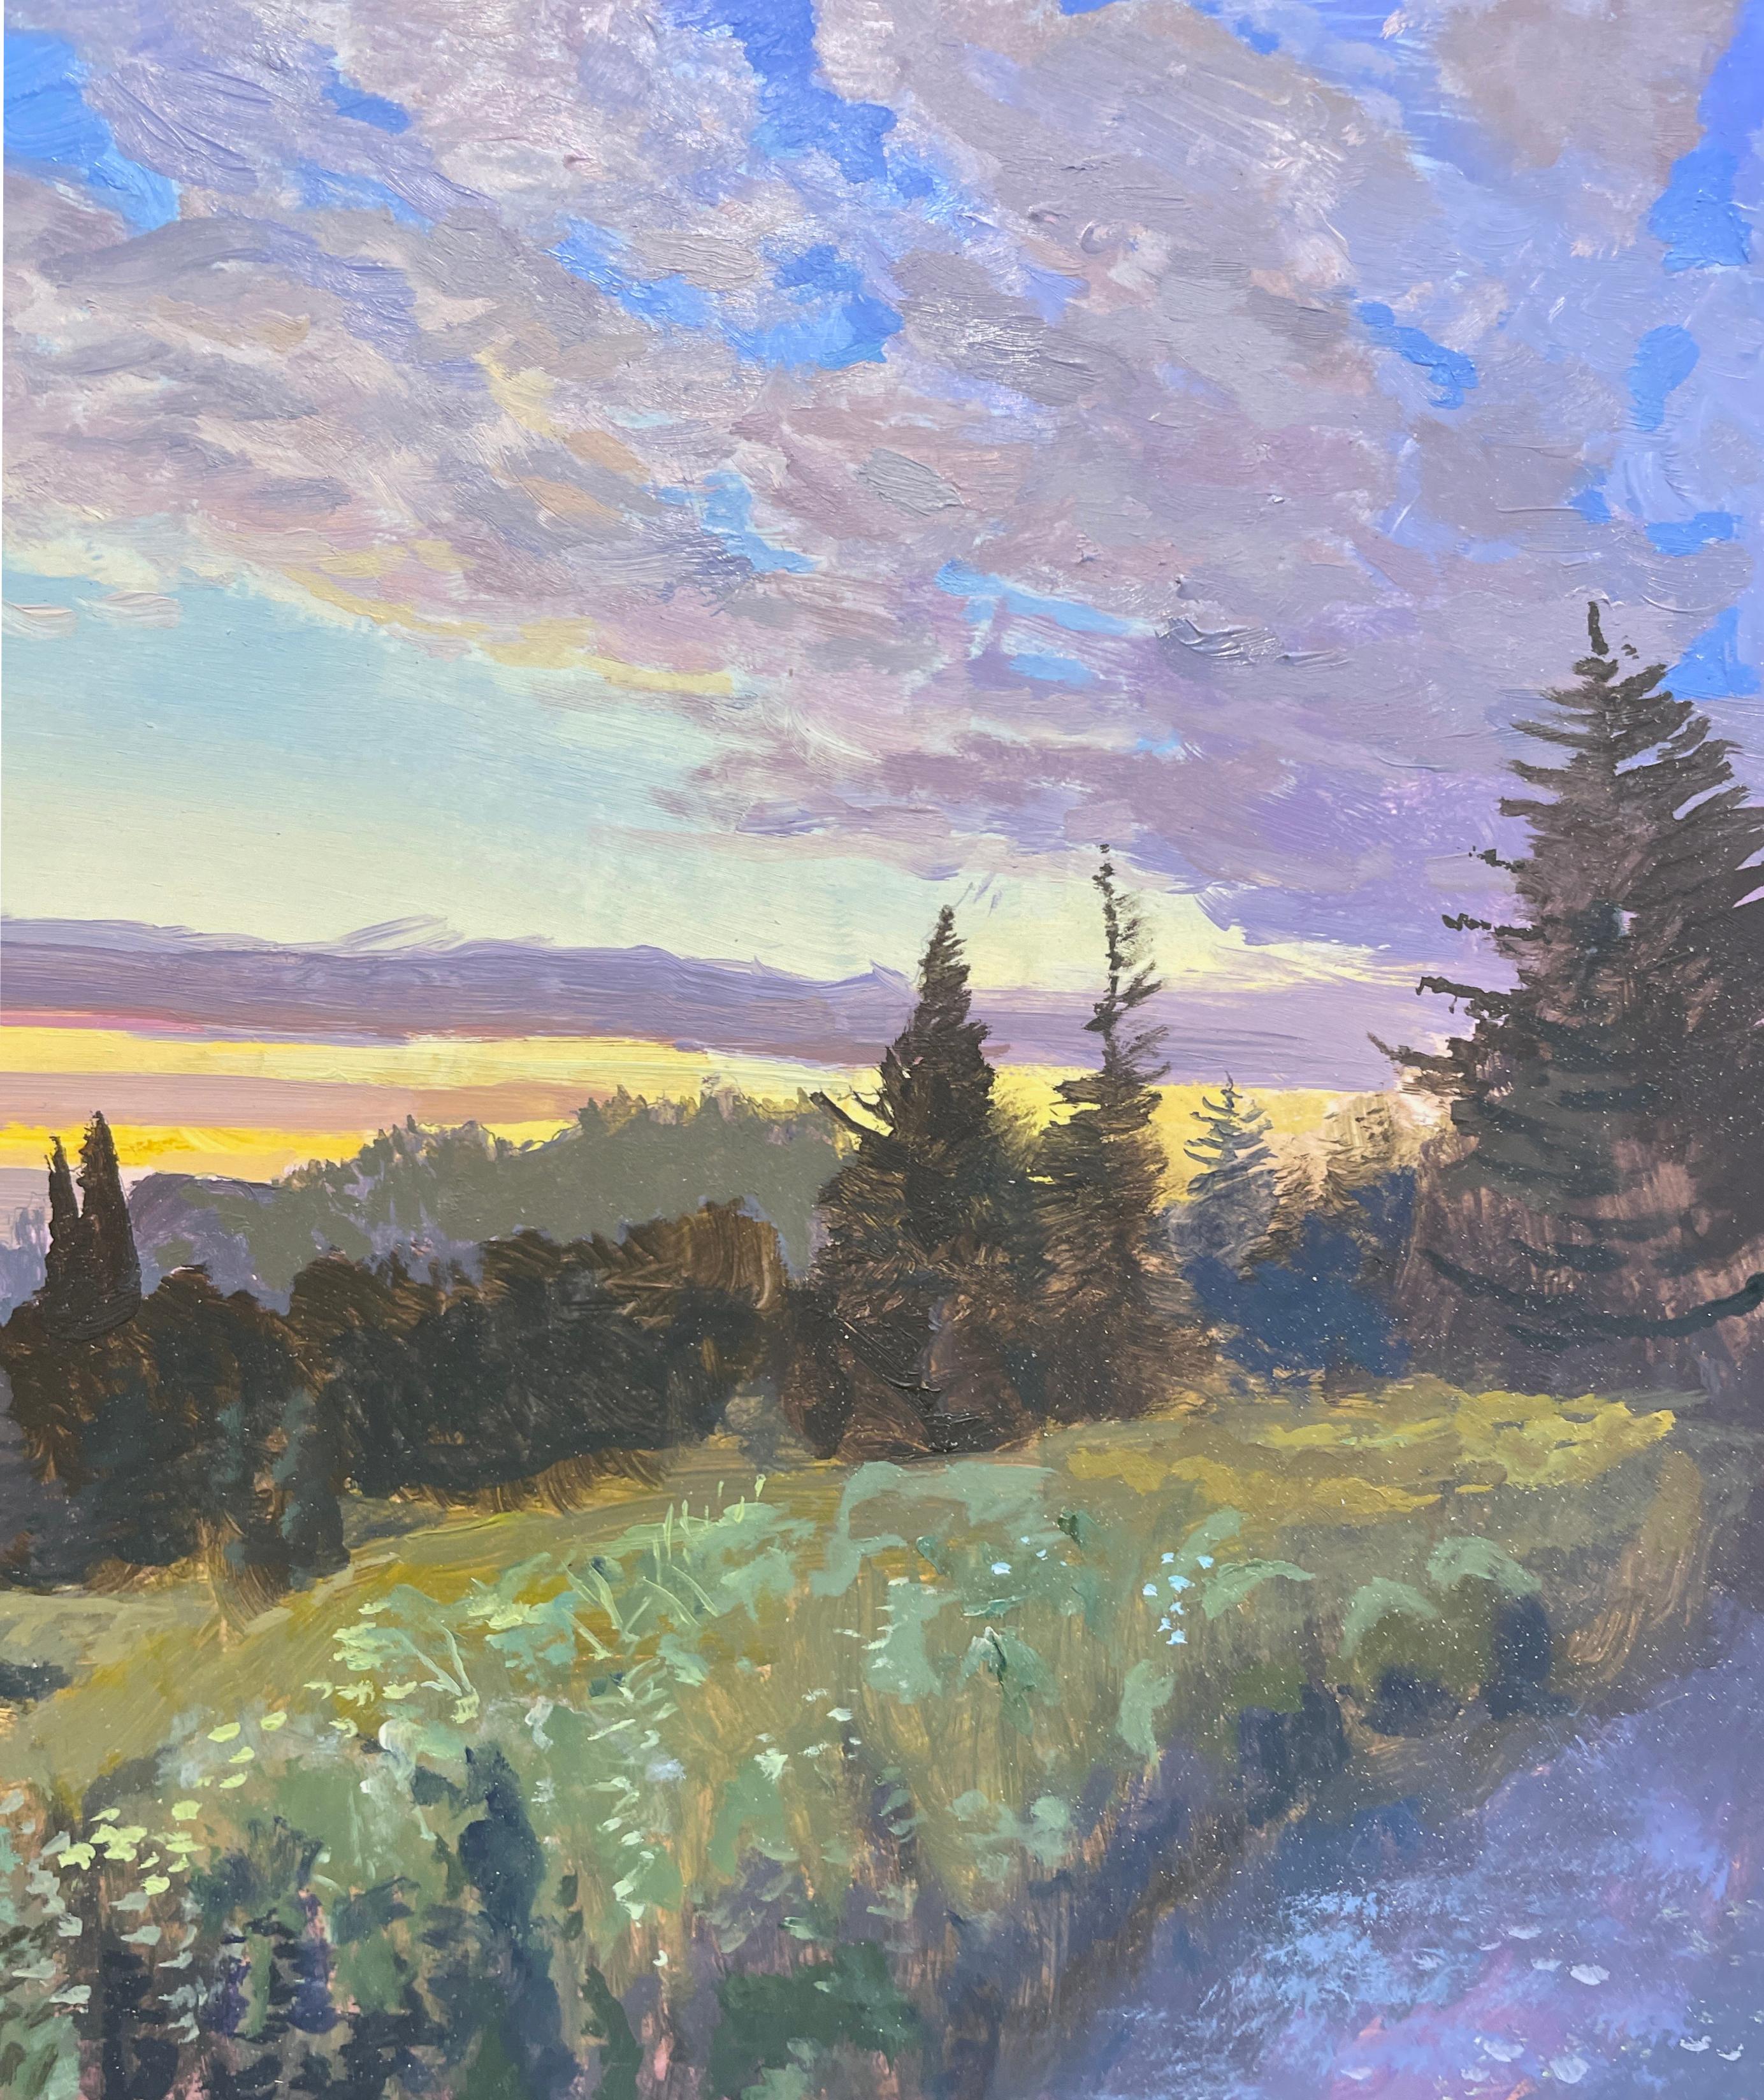 Arch Cape - Oregon, Wooded Landscape, Setting Sun and Ocean View, Oil on Panel - Painting by Art Chartow